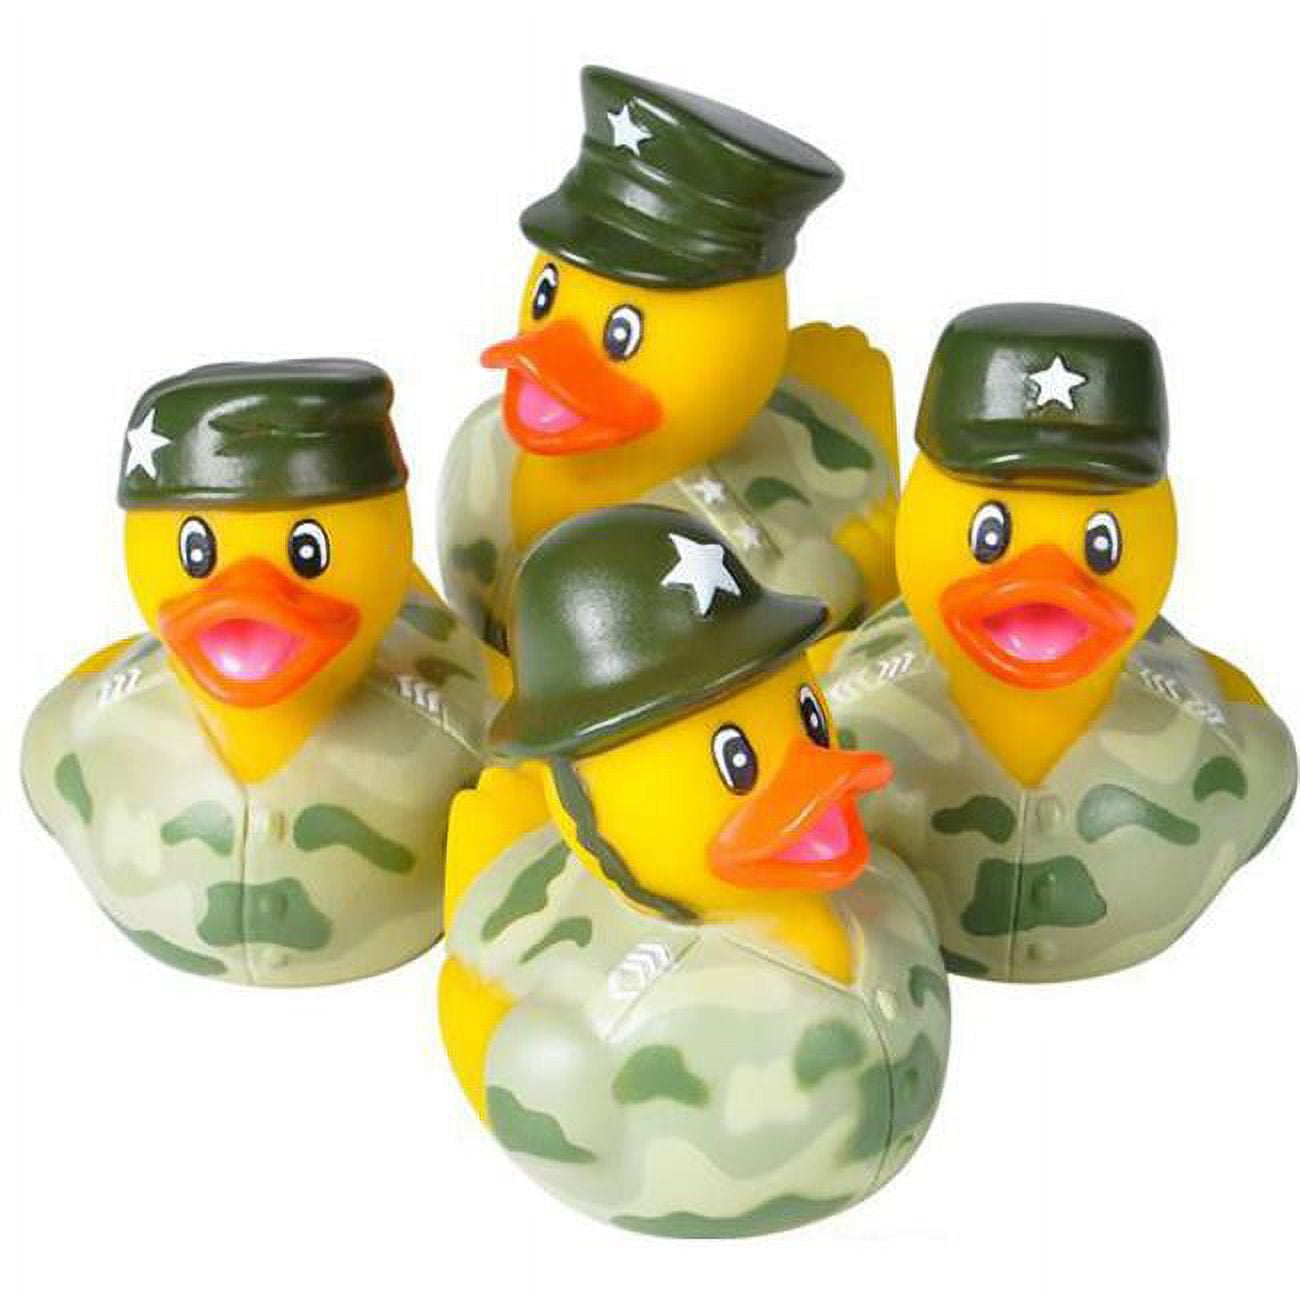 DDI 1930816 2 Assorted Army Camouflage Rubber Ducks Case of 576 